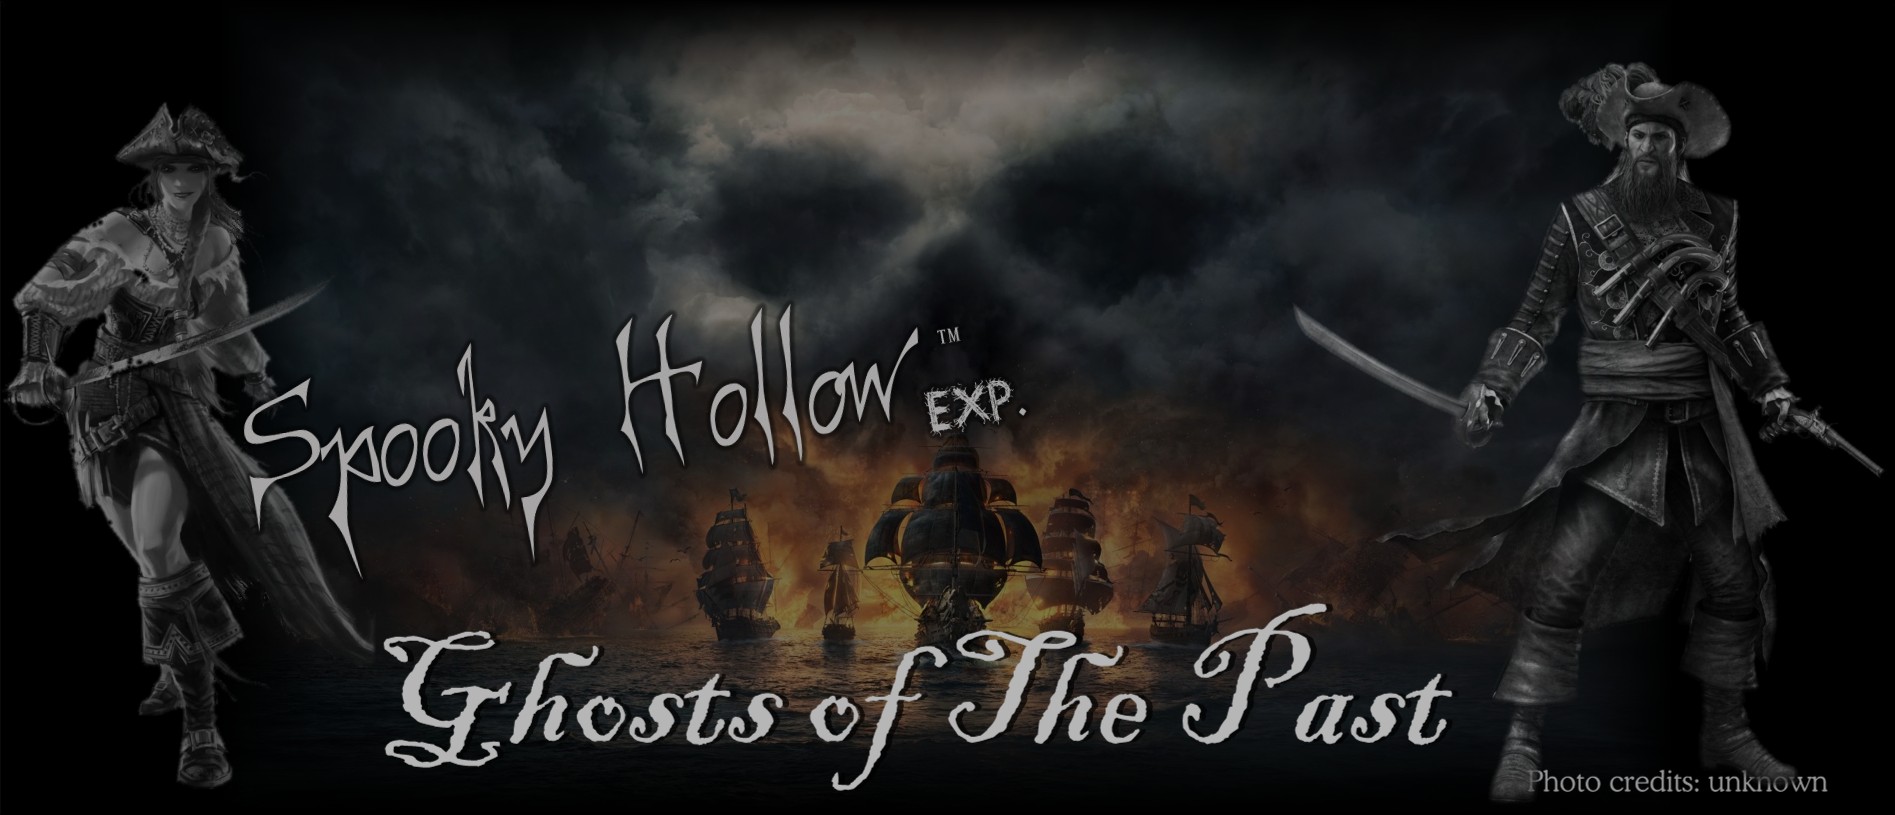 Spooky Hollow Experience 2017